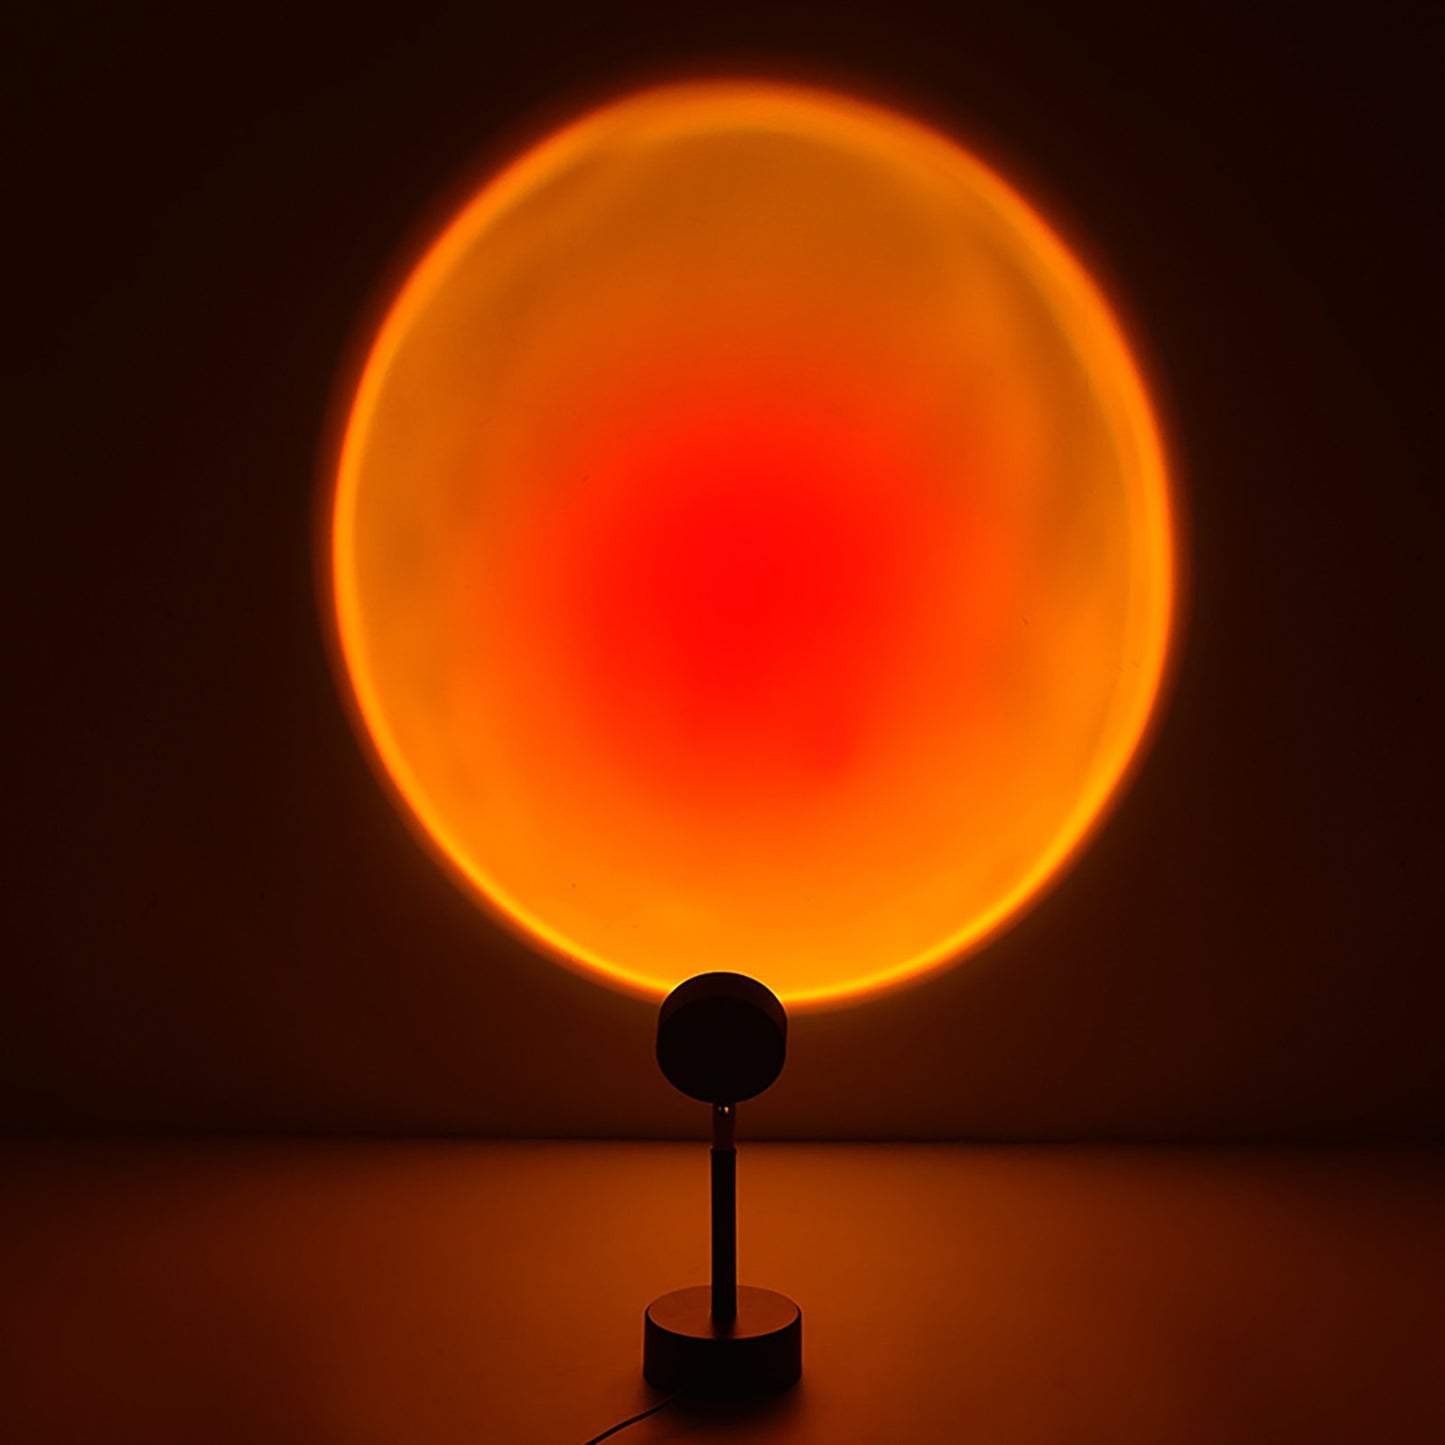 A round lamp projects a large, bright orange circle onto the wall, resembling the sun.